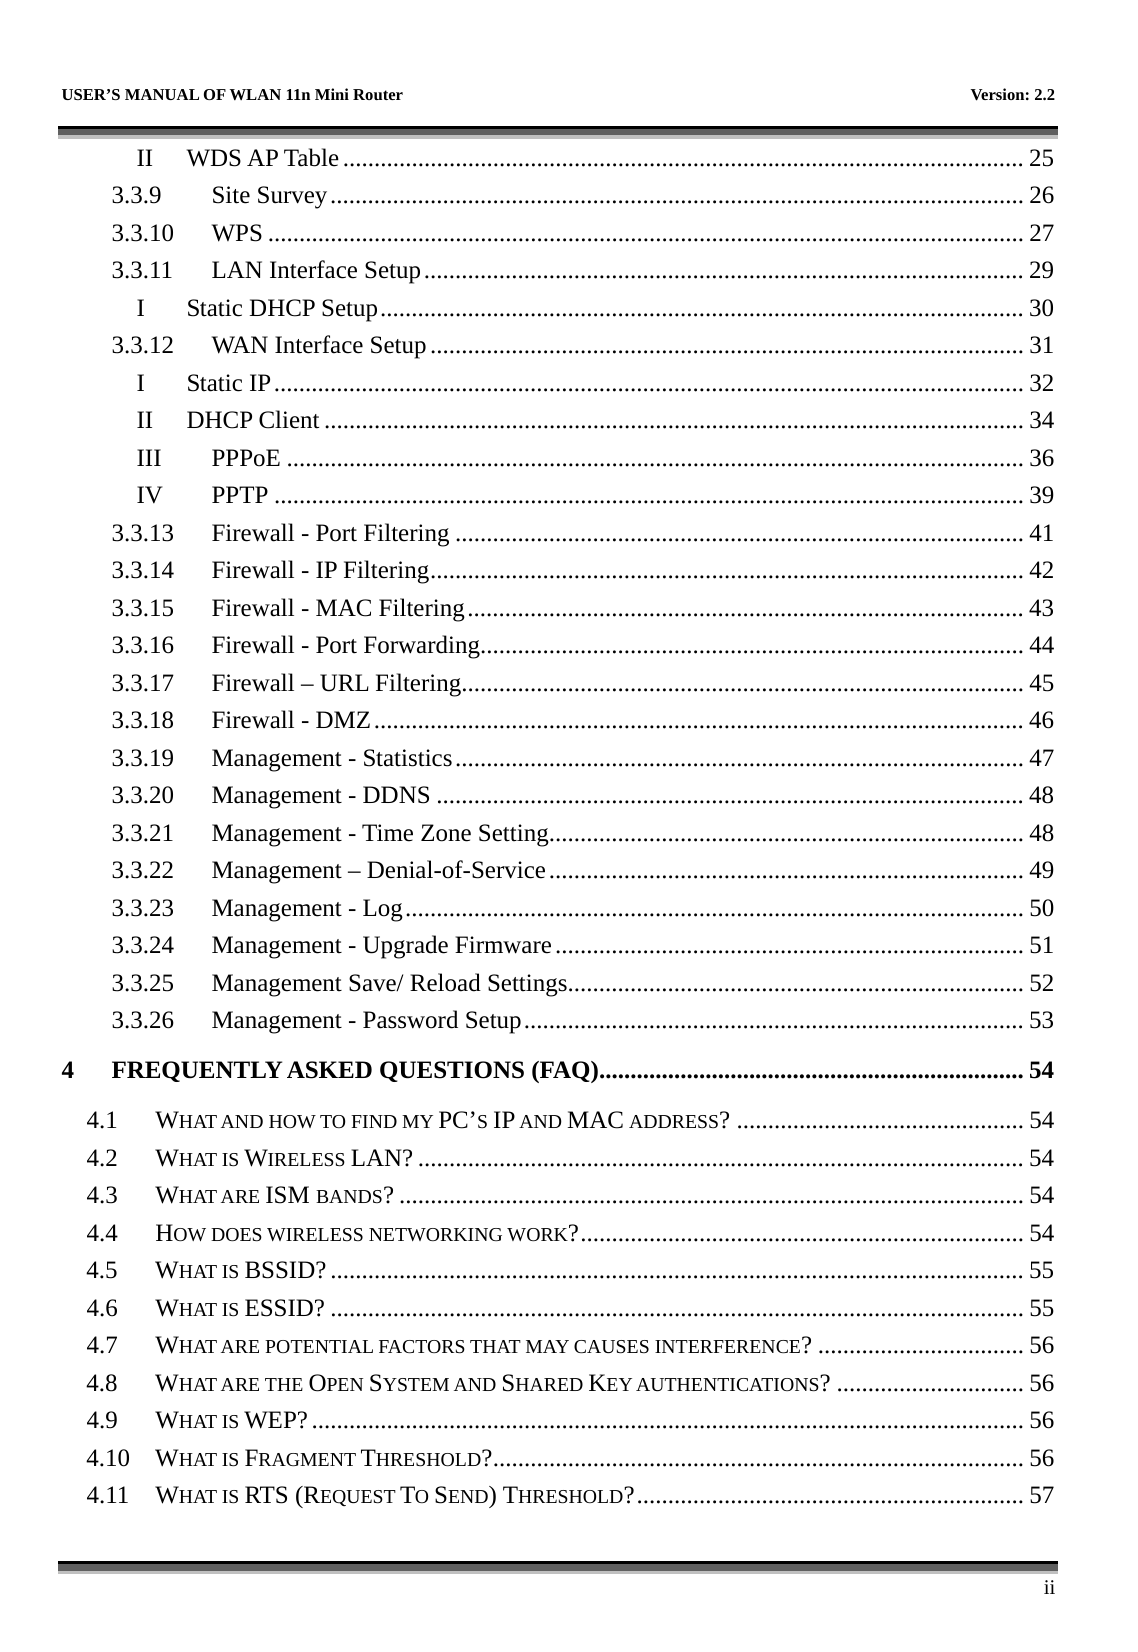   USER’S MANUAL OF WLAN 11n Mini Router    Version: 2.2      ii II WDS AP Table............................................................................................................. 25 3.3.9 Site Survey............................................................................................................... 26 3.3.10 WPS ......................................................................................................................... 27 3.3.11 LAN Interface Setup................................................................................................ 29 I Static DHCP Setup....................................................................................................... 30 3.3.12 WAN Interface Setup............................................................................................... 31 I Static IP........................................................................................................................ 32 II DHCP Client ................................................................................................................ 34 III PPPoE ...................................................................................................................... 36 IV PPTP ........................................................................................................................ 39 3.3.13 Firewall - Port Filtering ........................................................................................... 41 3.3.14 Firewall - IP Filtering............................................................................................... 42 3.3.15 Firewall - MAC Filtering......................................................................................... 43 3.3.16 Firewall - Port Forwarding....................................................................................... 44 3.3.17 Firewall – URL Filtering.......................................................................................... 45 3.3.18 Firewall - DMZ........................................................................................................ 46 3.3.19 Management - Statistics........................................................................................... 47 3.3.20 Management - DDNS .............................................................................................. 48 3.3.21 Management - Time Zone Setting............................................................................ 48 3.3.22 Management – Denial-of-Service............................................................................ 49 3.3.23 Management - Log................................................................................................... 50 3.3.24 Management - Upgrade Firmware........................................................................... 51 3.3.25 Management Save/ Reload Settings......................................................................... 52 3.3.26 Management - Password Setup................................................................................ 53 4 FREQUENTLY ASKED QUESTIONS (FAQ).................................................................... 54 4.1 WHAT AND HOW TO FIND MY PC’S IP AND MAC ADDRESS? .............................................. 54 4.2 WHAT IS WIRELESS LAN? ................................................................................................. 54 4.3 WHAT ARE ISM BANDS? .................................................................................................... 54 4.4 HOW DOES WIRELESS NETWORKING WORK?....................................................................... 54 4.5 WHAT IS BSSID?............................................................................................................... 55 4.6 WHAT IS ESSID? ............................................................................................................... 55 4.7 WHAT ARE POTENTIAL FACTORS THAT MAY CAUSES INTERFERENCE? ................................. 56 4.8 WHAT ARE THE OPEN SYSTEM AND SHARED KEY AUTHENTICATIONS? .............................. 56 4.9 WHAT IS WEP?.................................................................................................................. 56 4.10 WHAT IS FRAGMENT THRESHOLD?..................................................................................... 56 4.11 WHAT IS RTS (REQUEST TO SEND) THRESHOLD?.............................................................. 57 